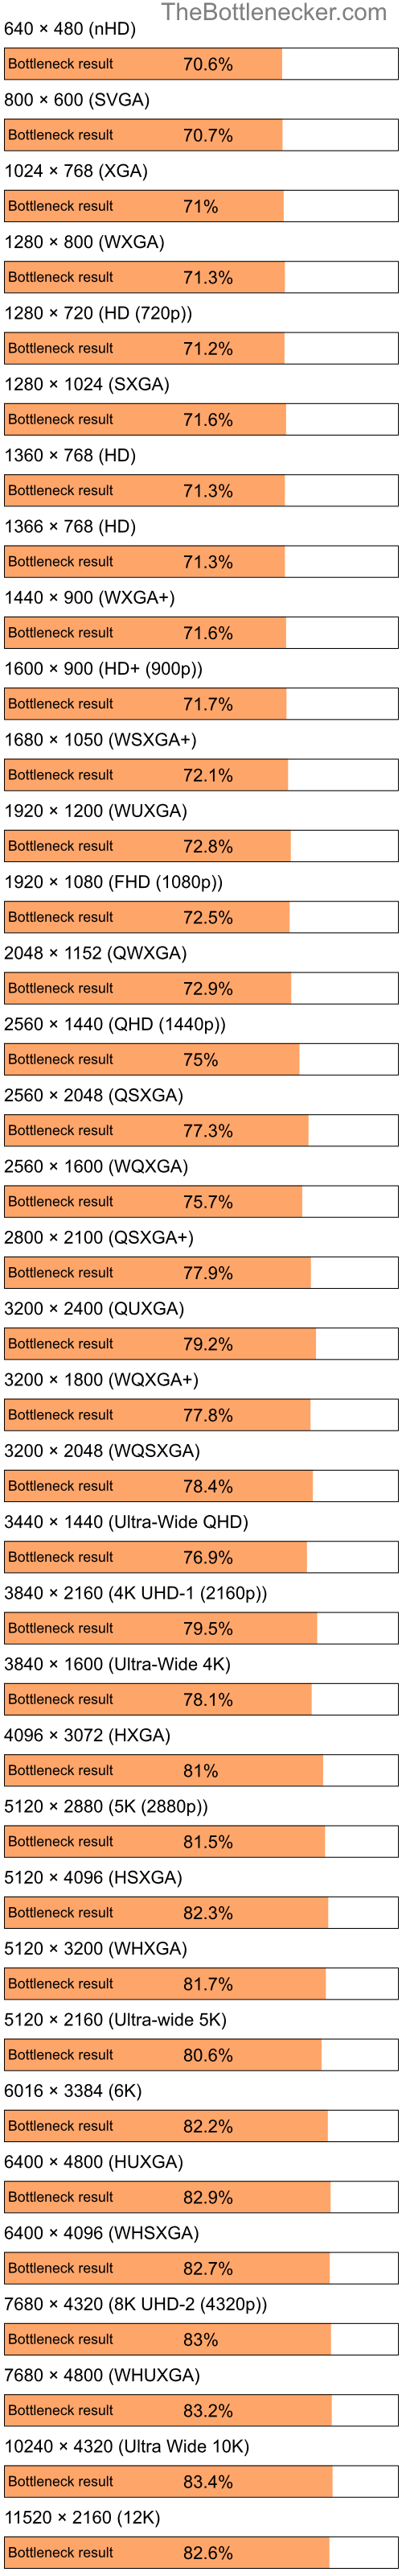 Bottleneck results by resolution for Intel Celeron M 410 and AMD M880G with Mobility Radeon HD 4200 in Graphic Card Intense Tasks